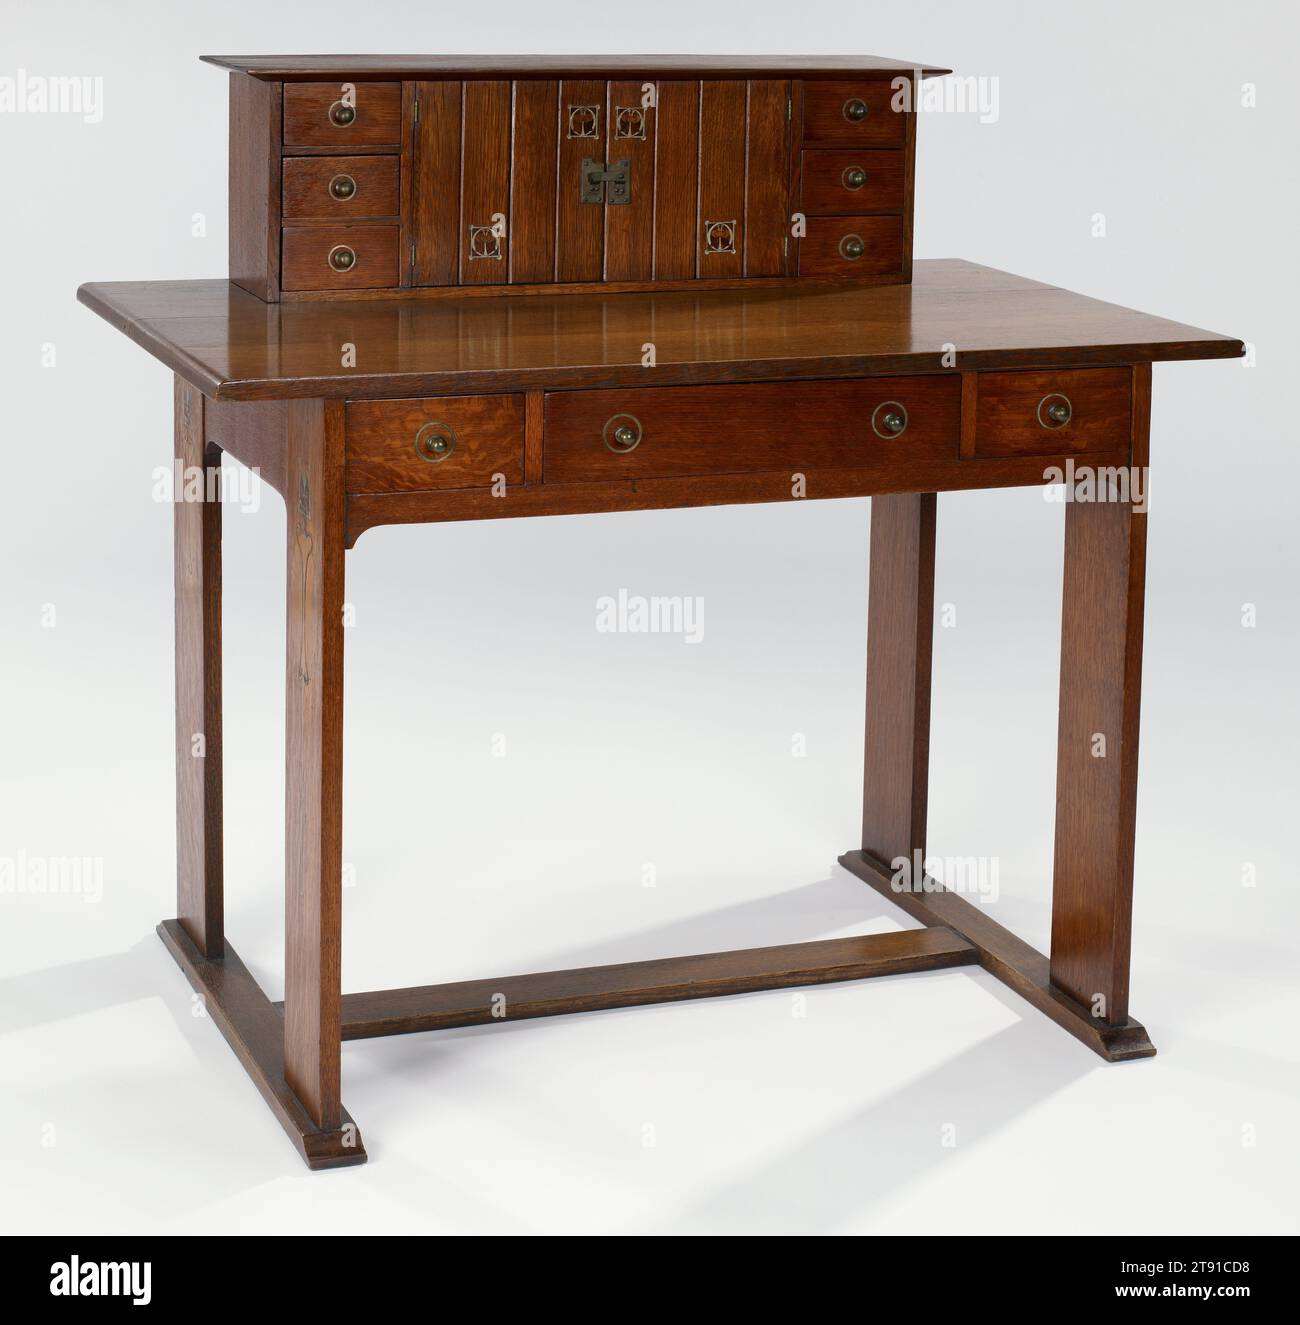 Desk, c. 1903, Craftsman Workshops of Gustav Stickley, American (Eastwood, New York), 1899-1916, 40-1/8 x 42 x 25-1/4 in. (101.9 x 106.7 x 64.1 cm), American white oak, pewter, copper, wood inlay, United States, 19th-20th century, Gustav Stickley hired Harvey Ellis in June 1903 to create illustrations of Arts and Crafts homes for his publication the Craftsman. Ellis produced imaginative drawings for possible interiors in the July and August 1903 and in January 1904, the month of his death. For these interiors Ellis depicted of furniture resembling Stickley's current production pieces Stock Photo